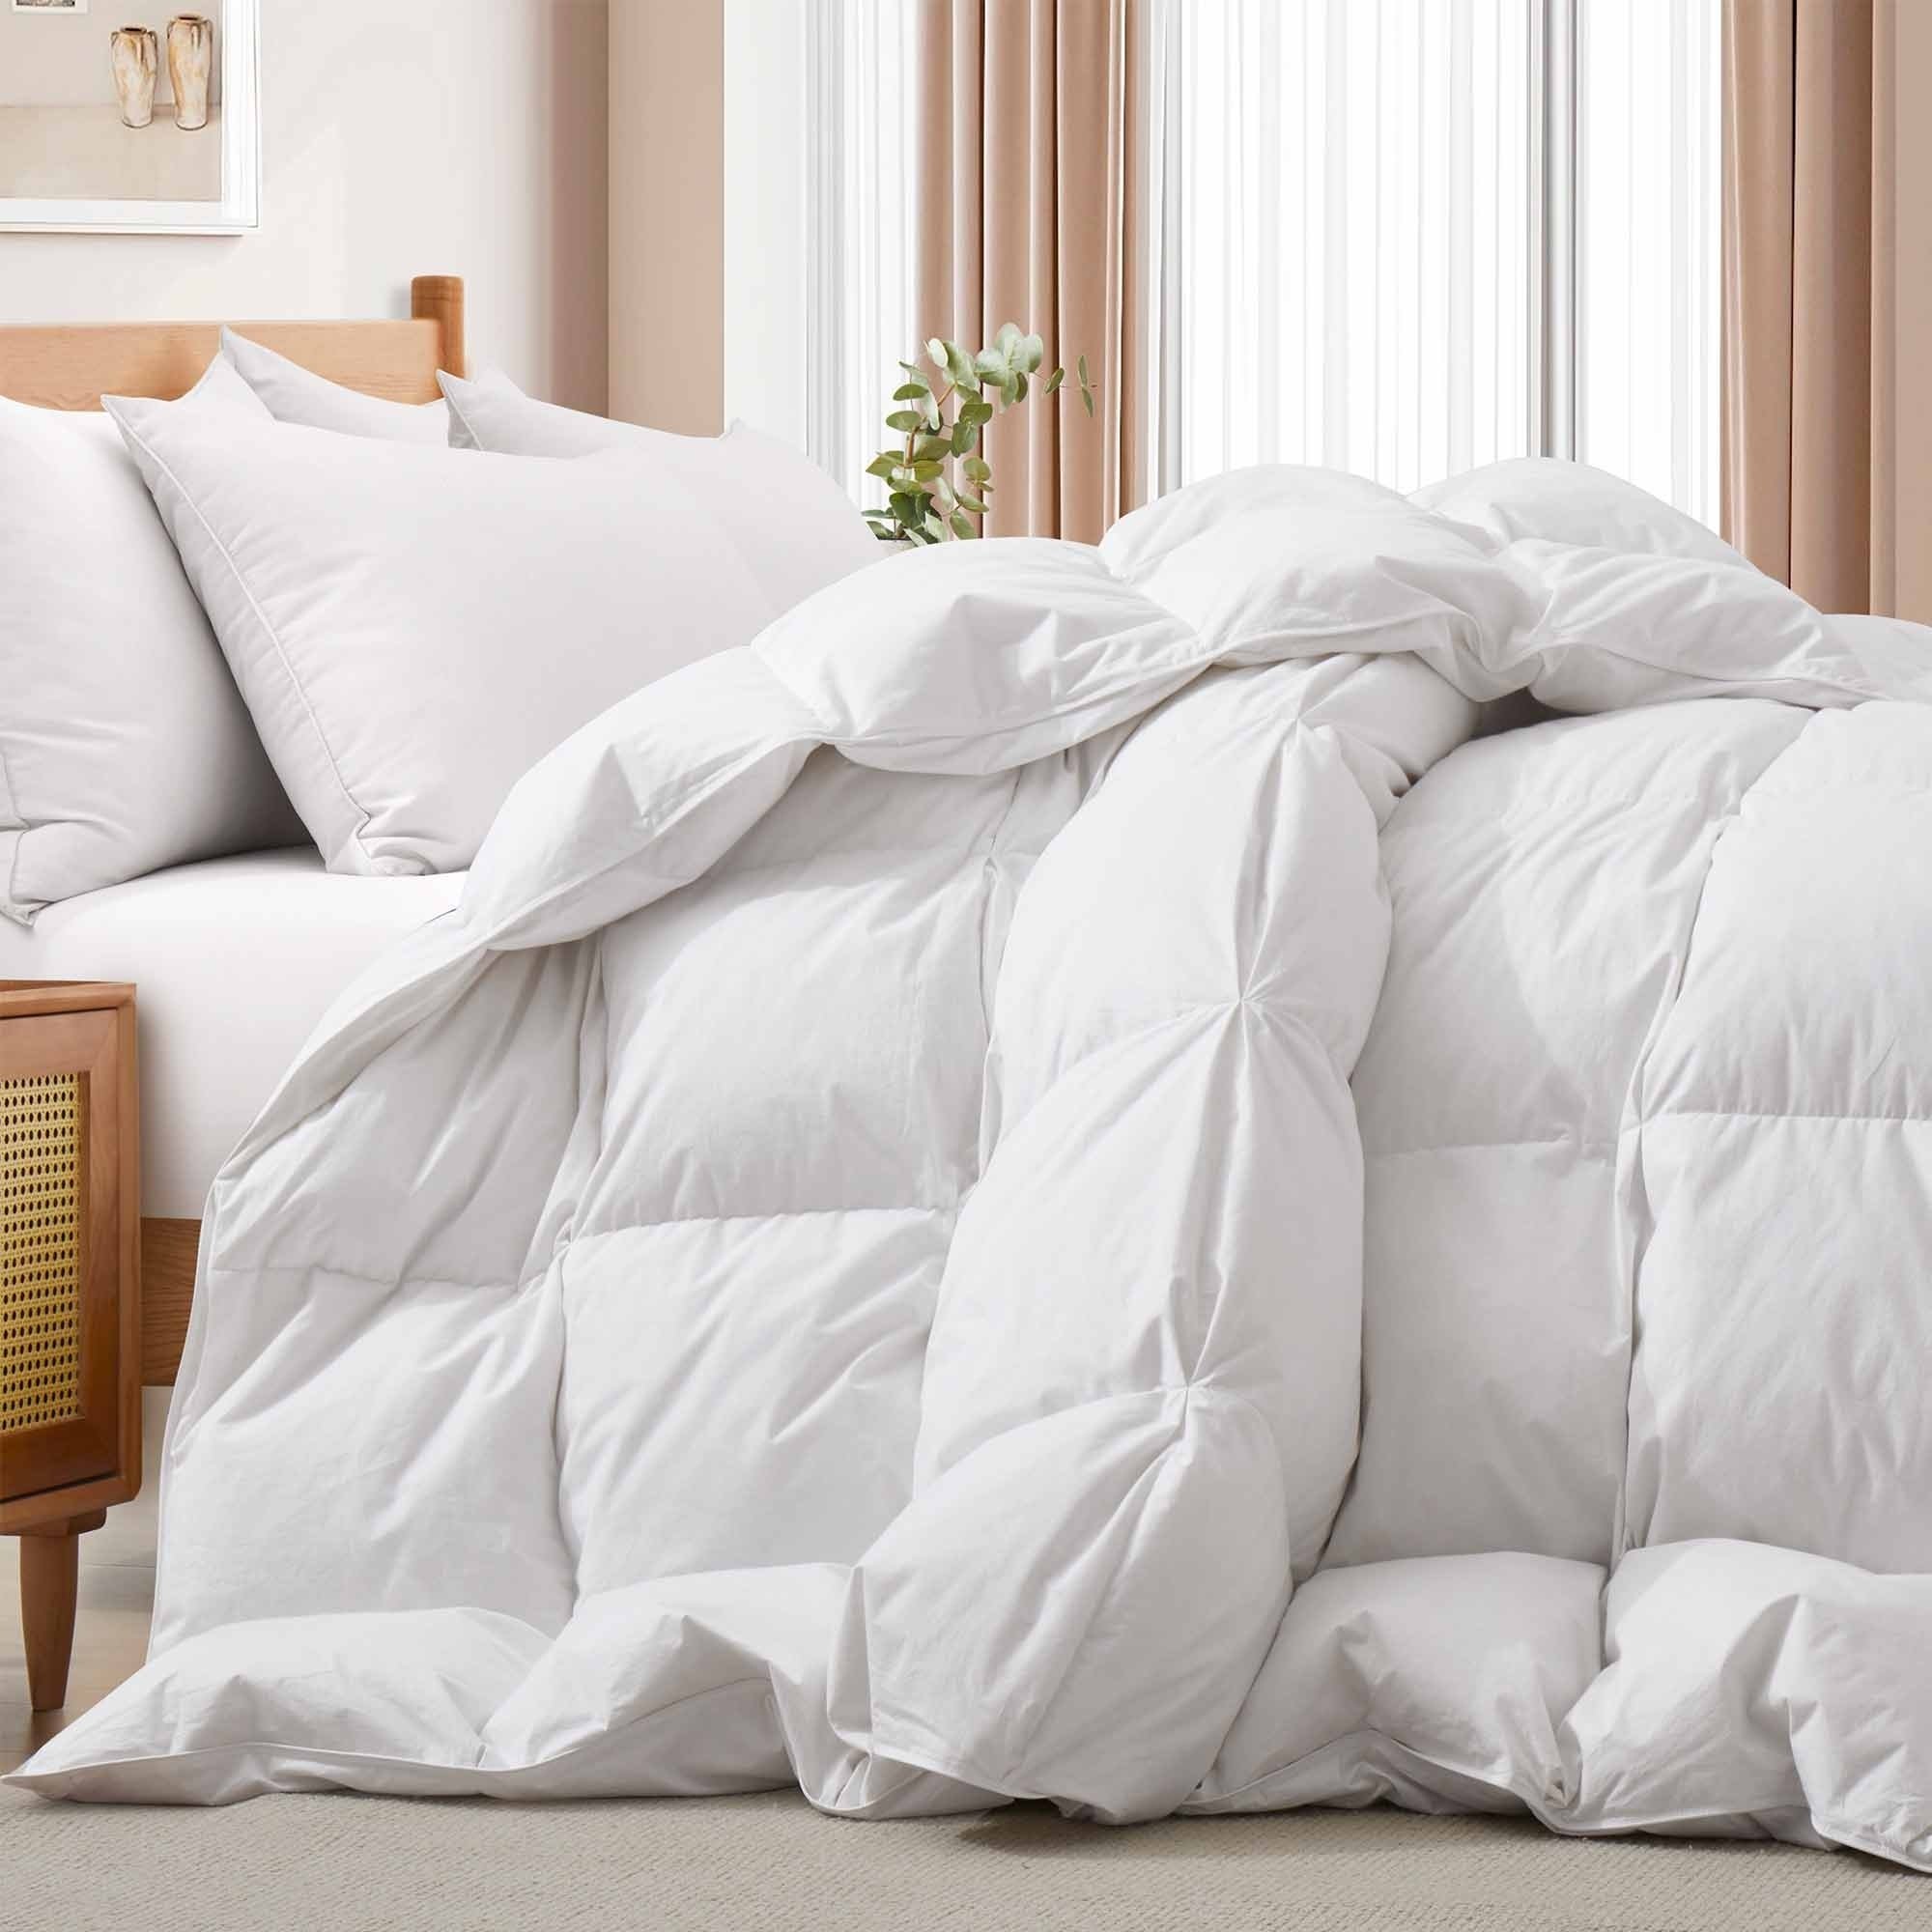 All Seasons Pinch Pleat Goose Feather And Down Comforter-Breathable Cotton Fabric Baffled Box Duvet Insert - White, Twin